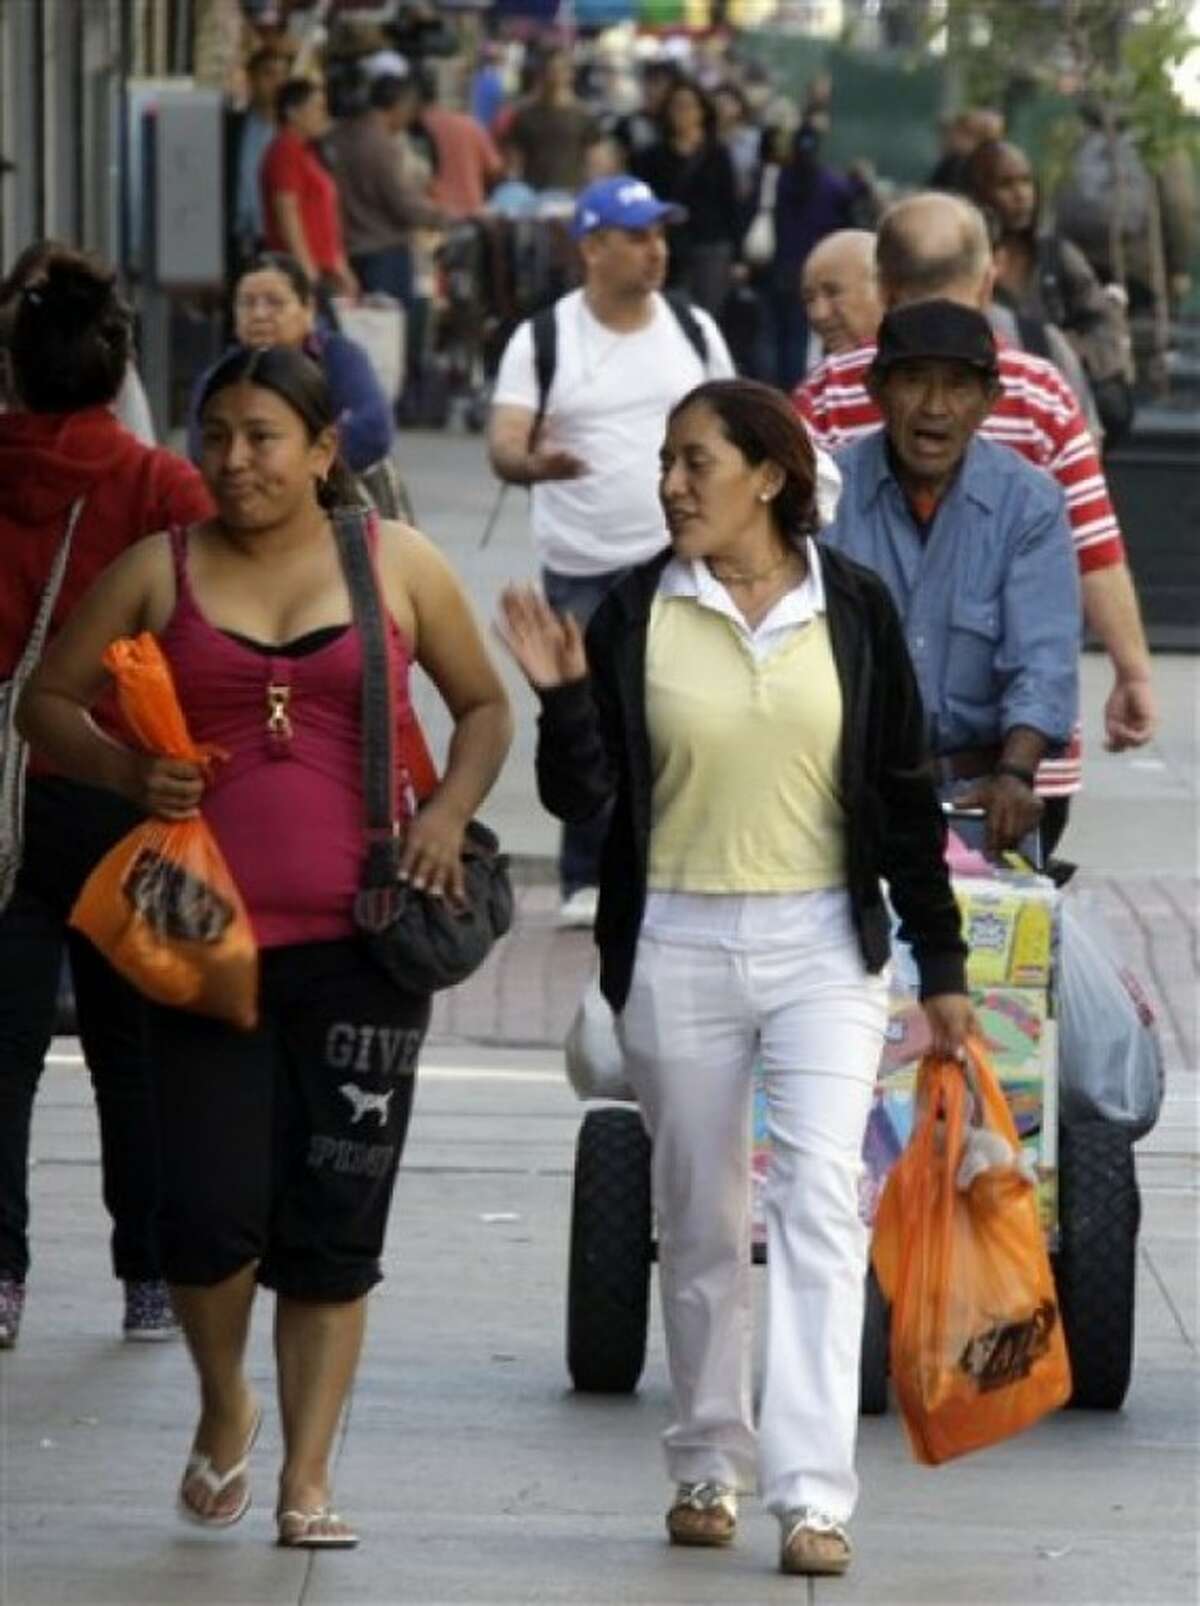 Latinos and others are seen on Broadway in downtown Los Angeles, where many businesses cater to a Spanish-speaking clientele, Wednesday, May 11, 2011. According to Census Bureau figures to be released Thursday, May 12, the population of people of Mexican descent in California grew by 6 percent in the last decade, and represent 31 percent of the total in the state. (AP Photo/Reed Saxon)